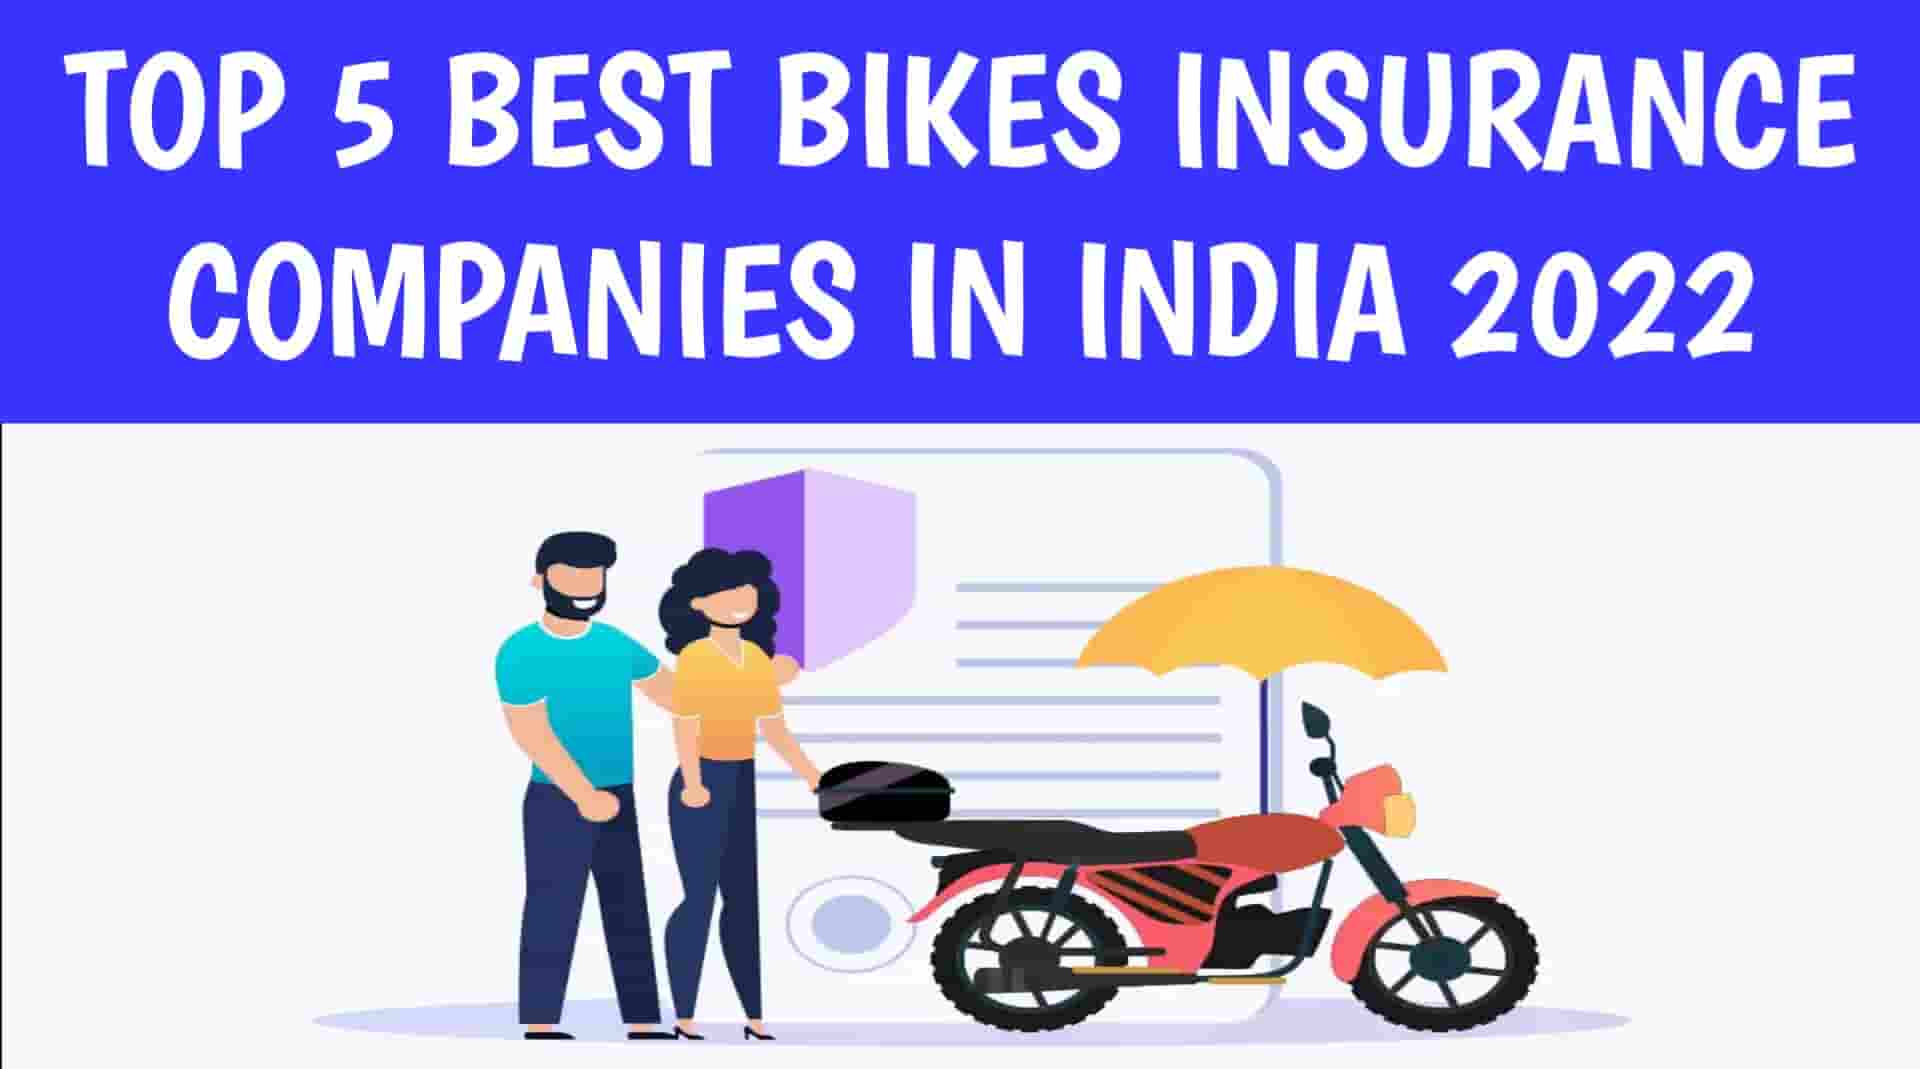 TOP 5 BEST BIKES INSURANCE COMPANIES IN INDIA 2022